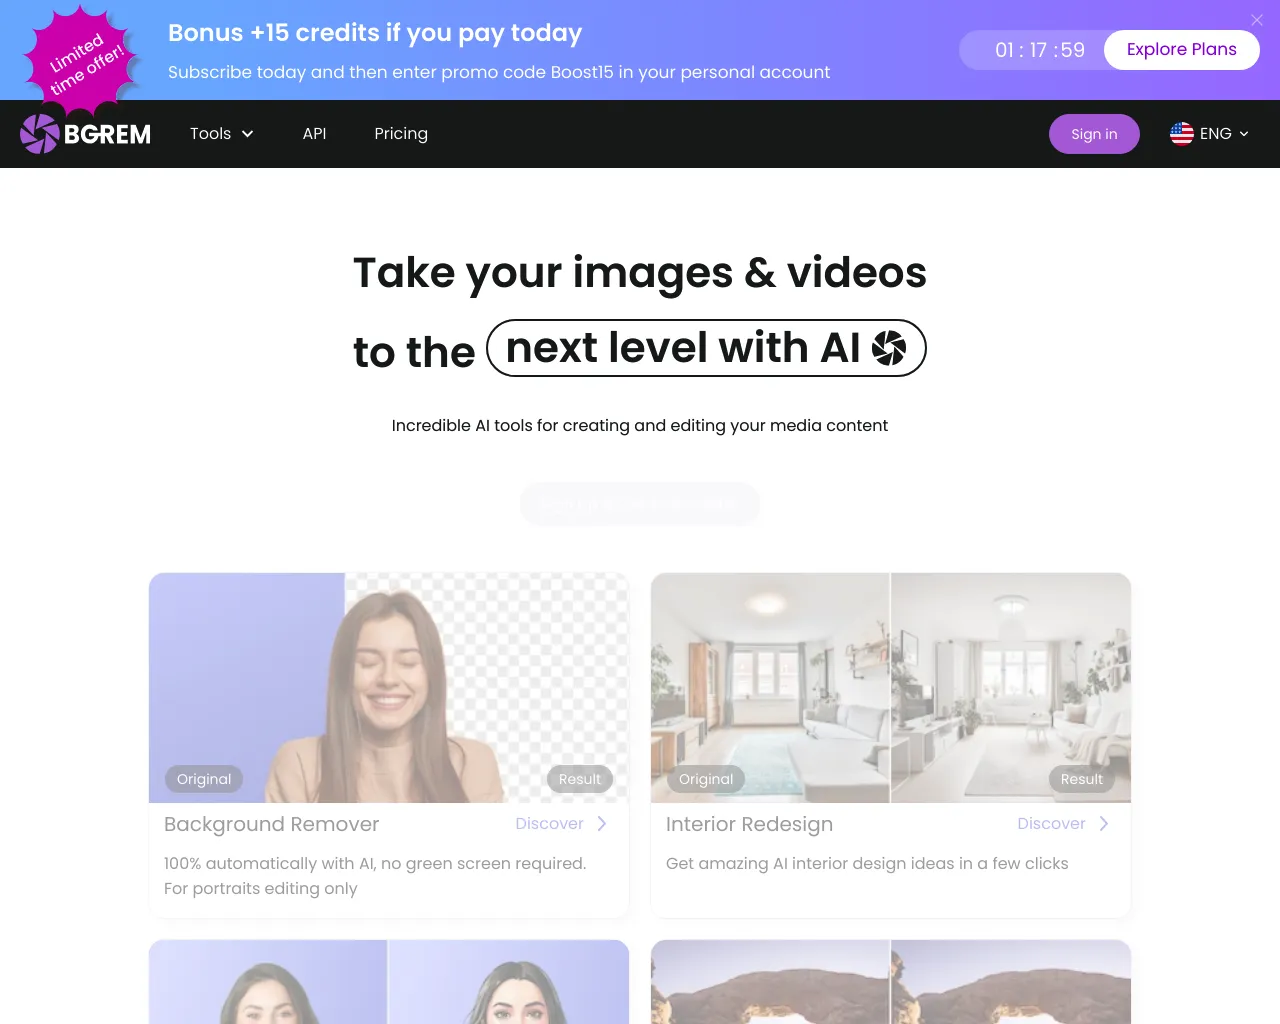 Incredible AI tools for creating and editing your media content